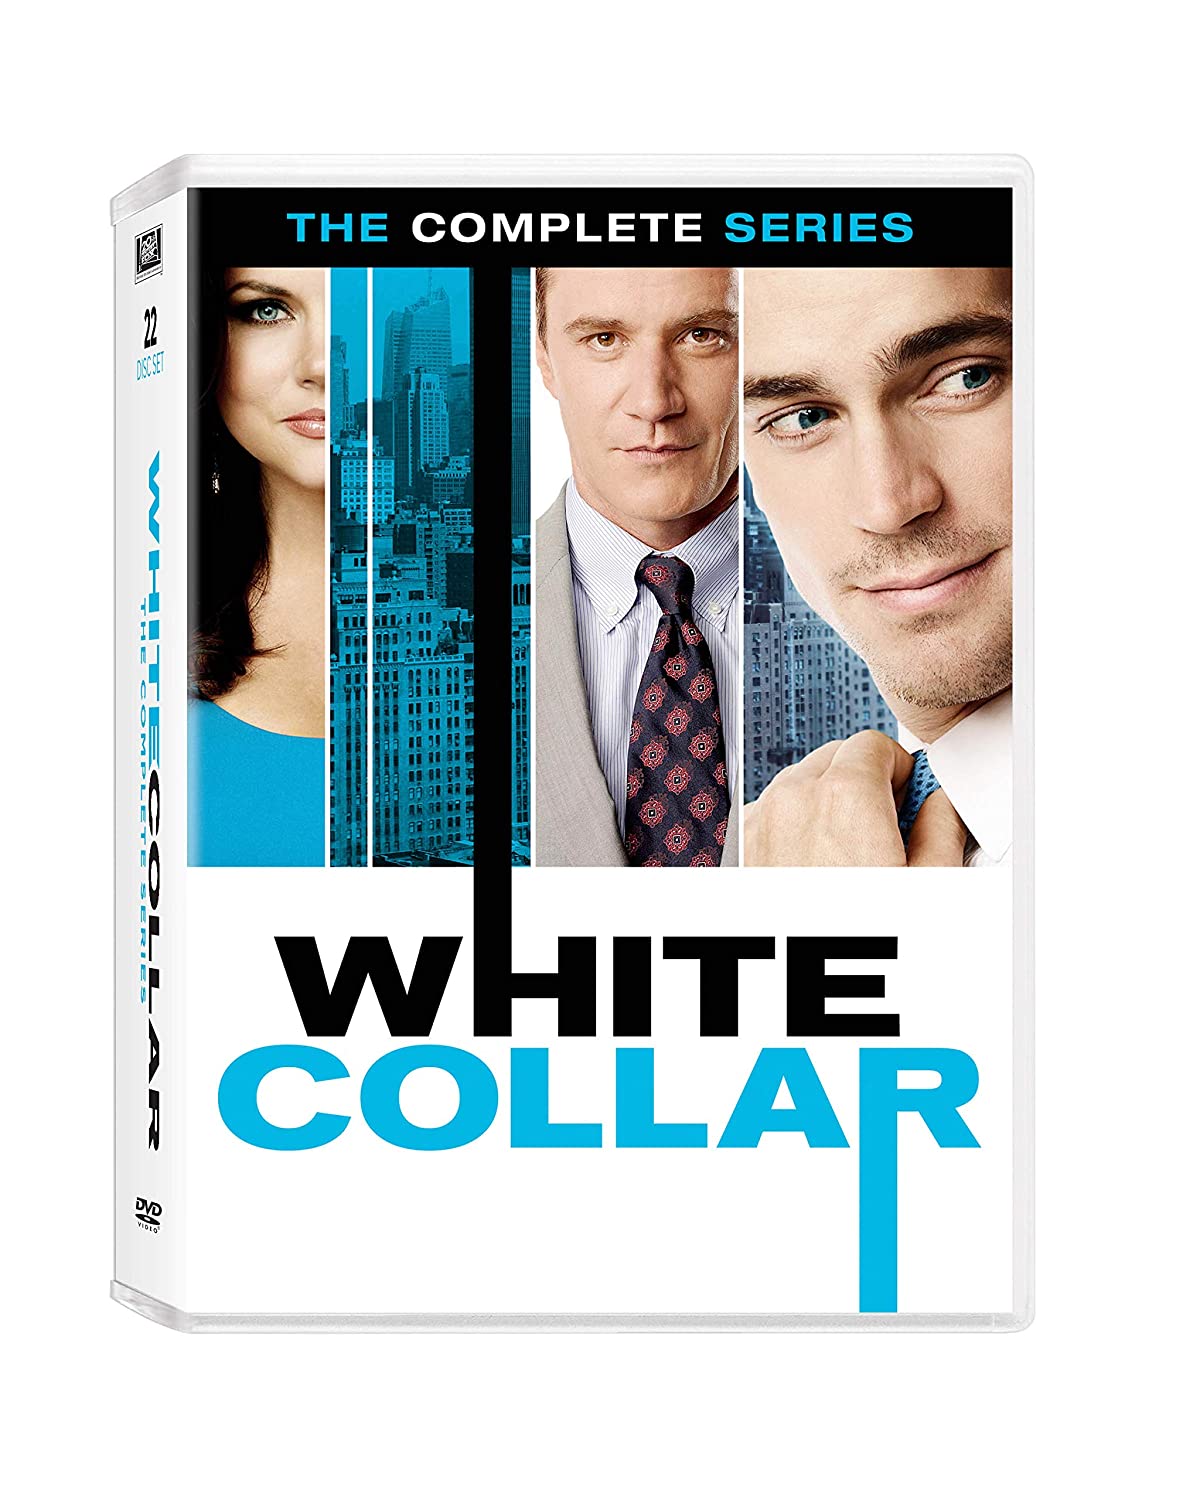 White Collar DVD Complete Series Box Set 20th Century Fox DVDs & Blu-ray Discs > DVDs > Box Sets